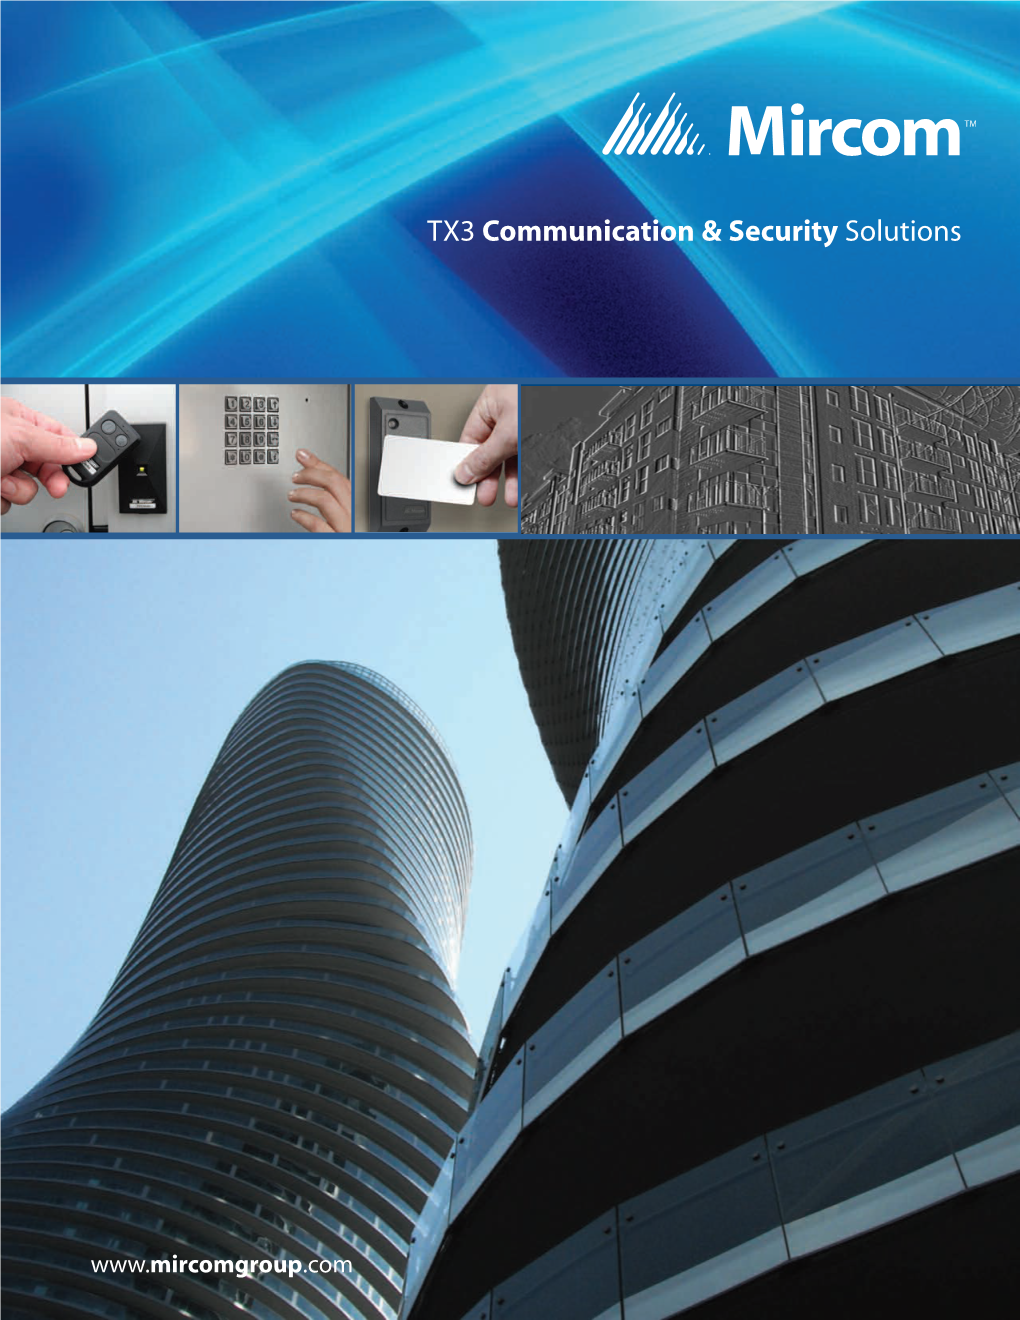 TX3 Communication & Security Solutions